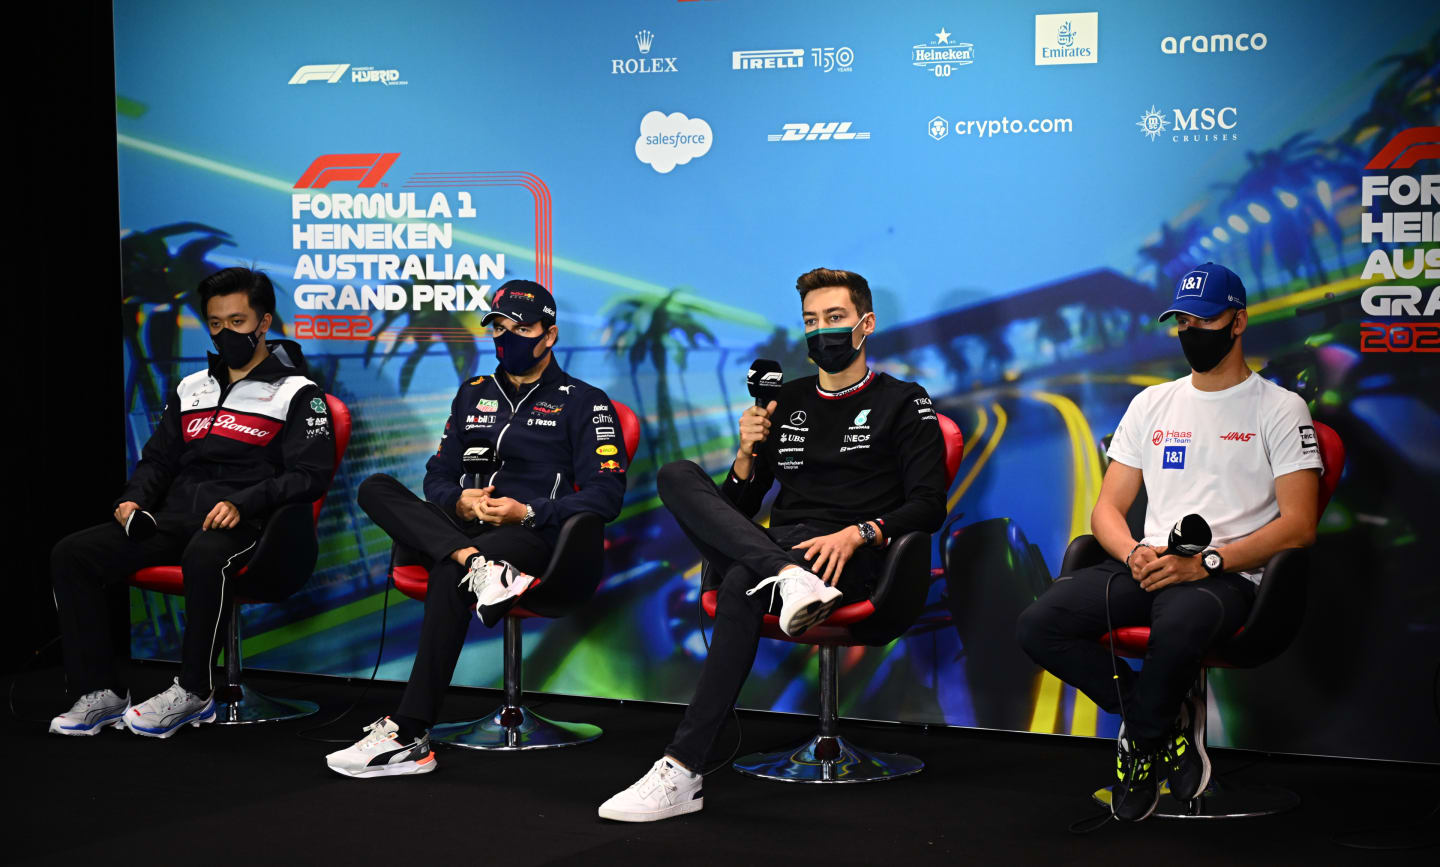 MELBOURNE, AUSTRALIA - APRIL 08: (L-R) Zhou Guanyu of China and Alfa Romeo F1, Sergio Perez of Mexico and Oracle Red Bull Racing, George Russell of Great Britain and Mercedes and Mick Schumacher of Germany and Haas F1 attend the Drivers Press Conference prior to practice ahead of the F1 Grand Prix of Australia at Melbourne Grand Prix Circuit on April 08, 2022 in Melbourne, Australia. (Photo by Clive Mason/Getty Images)